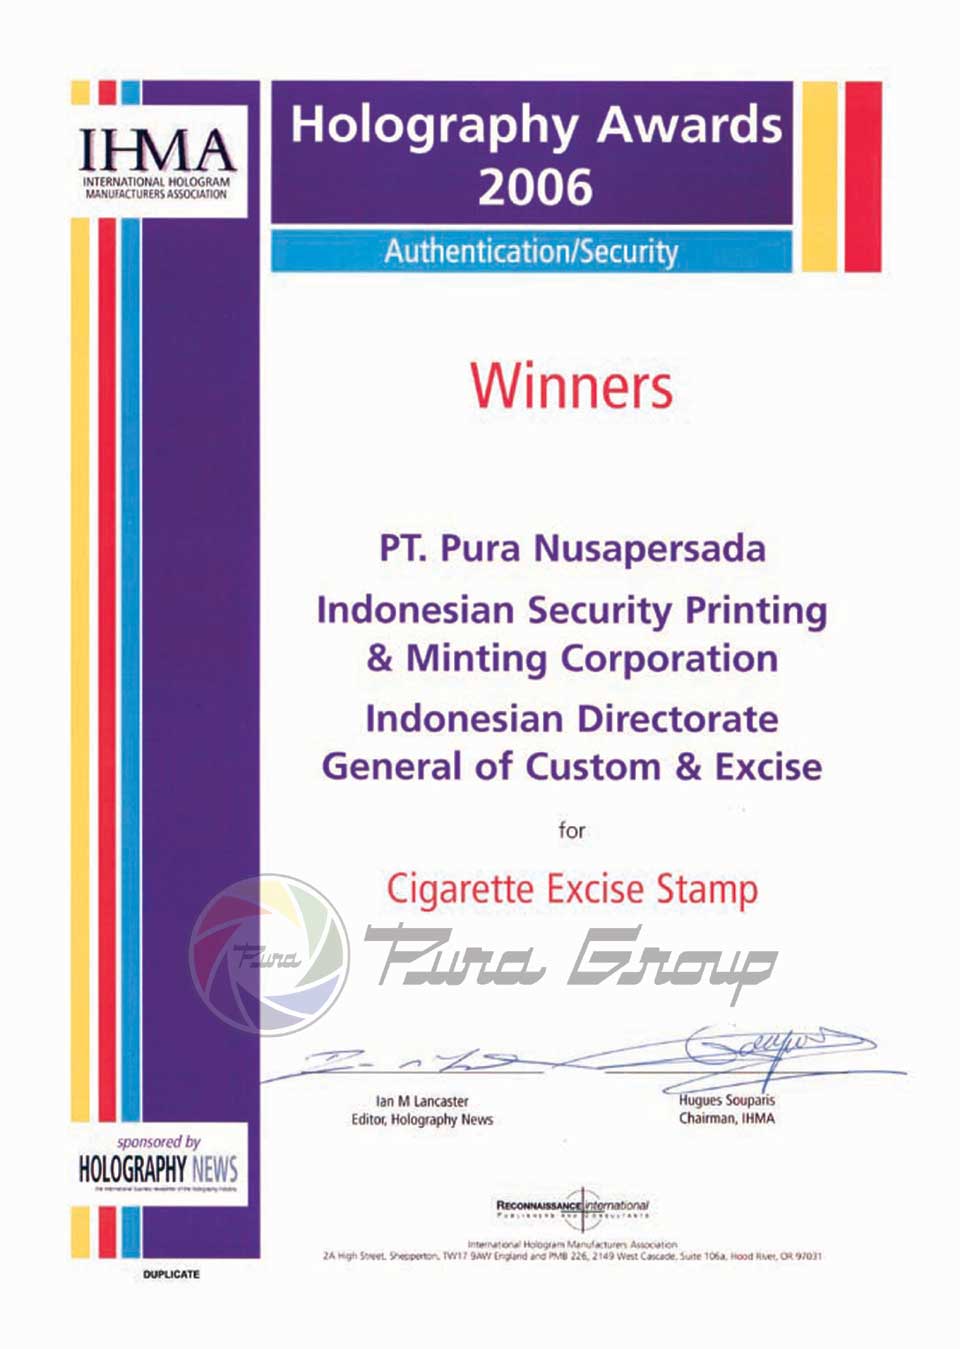 IHMA AWARDS 2006 FOR AUTHENTIFICATION ON EXCISE STAMP